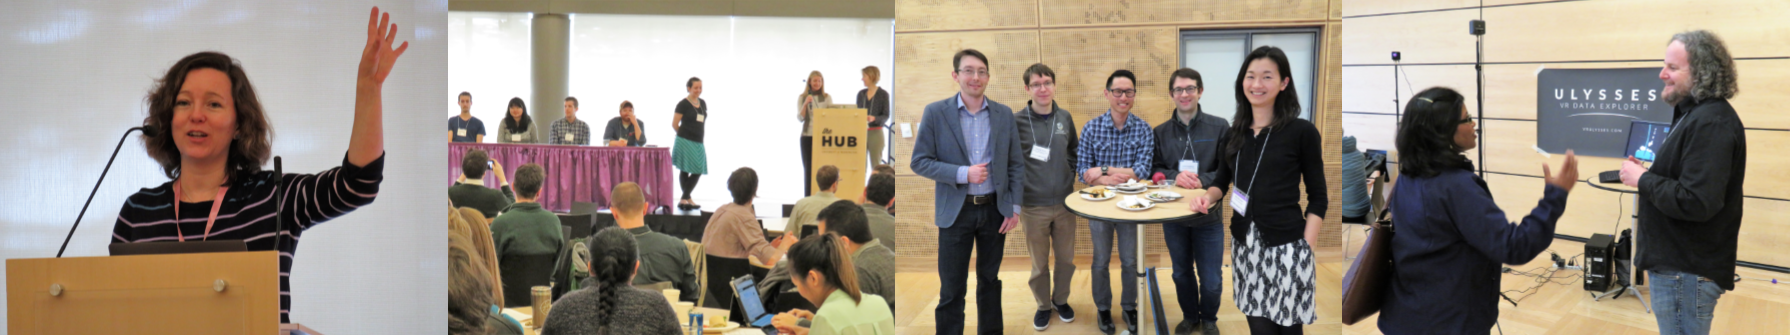 A collage of photos taken at the 2018 UW Data Science Summit